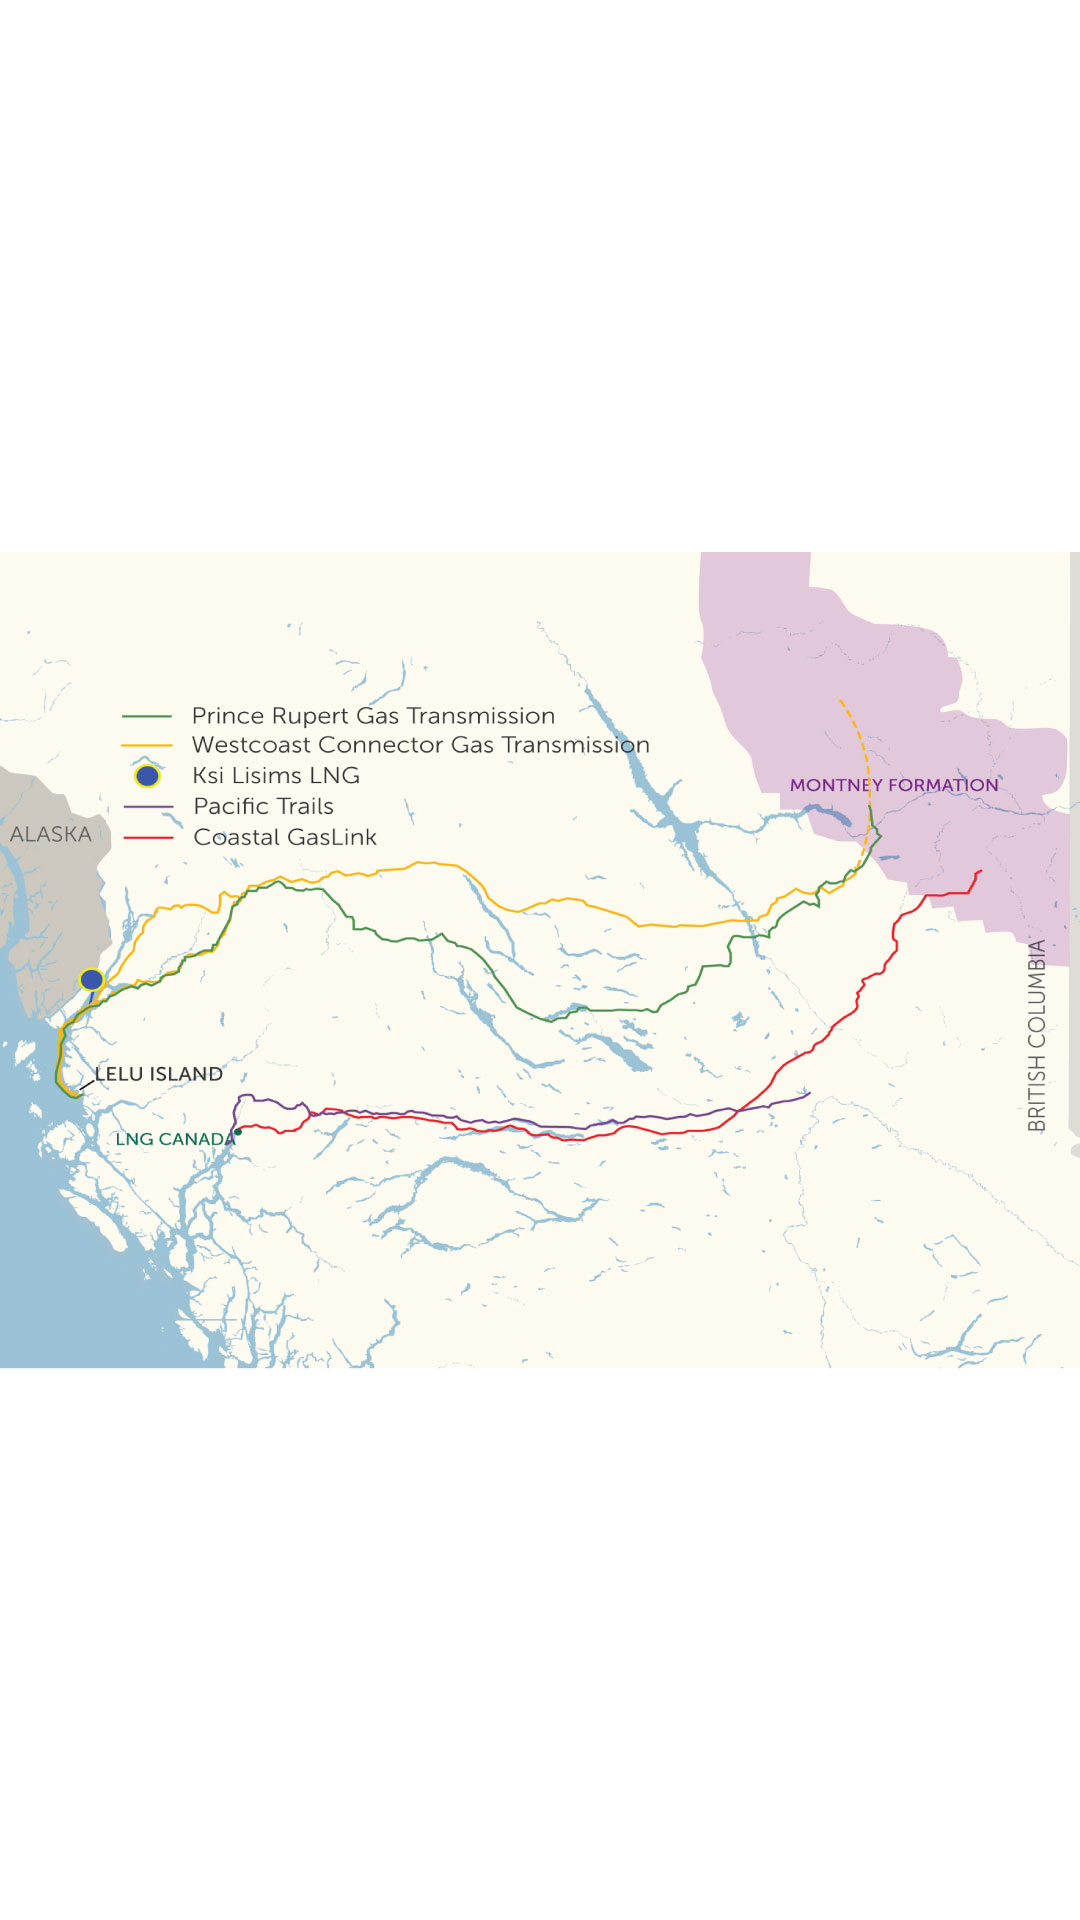 Map of routes for B.C. pipeline and resource projects: Prince Rupert Gas Transmission (green), Westcoast Connector Gas Transmission (yellow), Ksi Lisims LNG (blue), Pacific Trails (purple), Coastal GasLink (red).